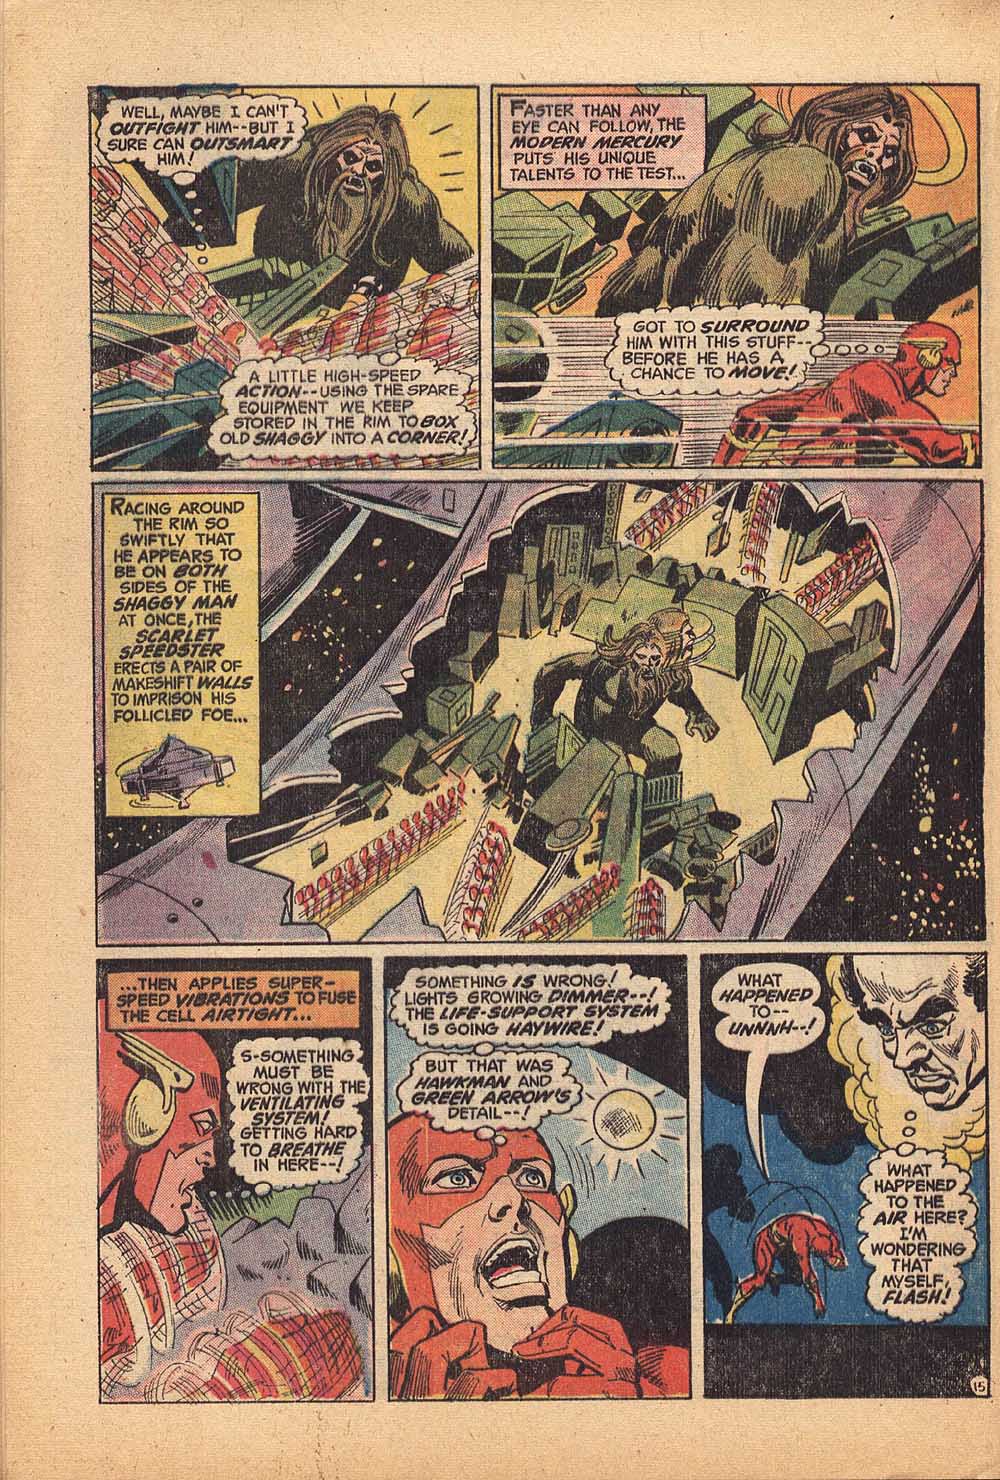 Justice League of America (1960) 104 Page 15